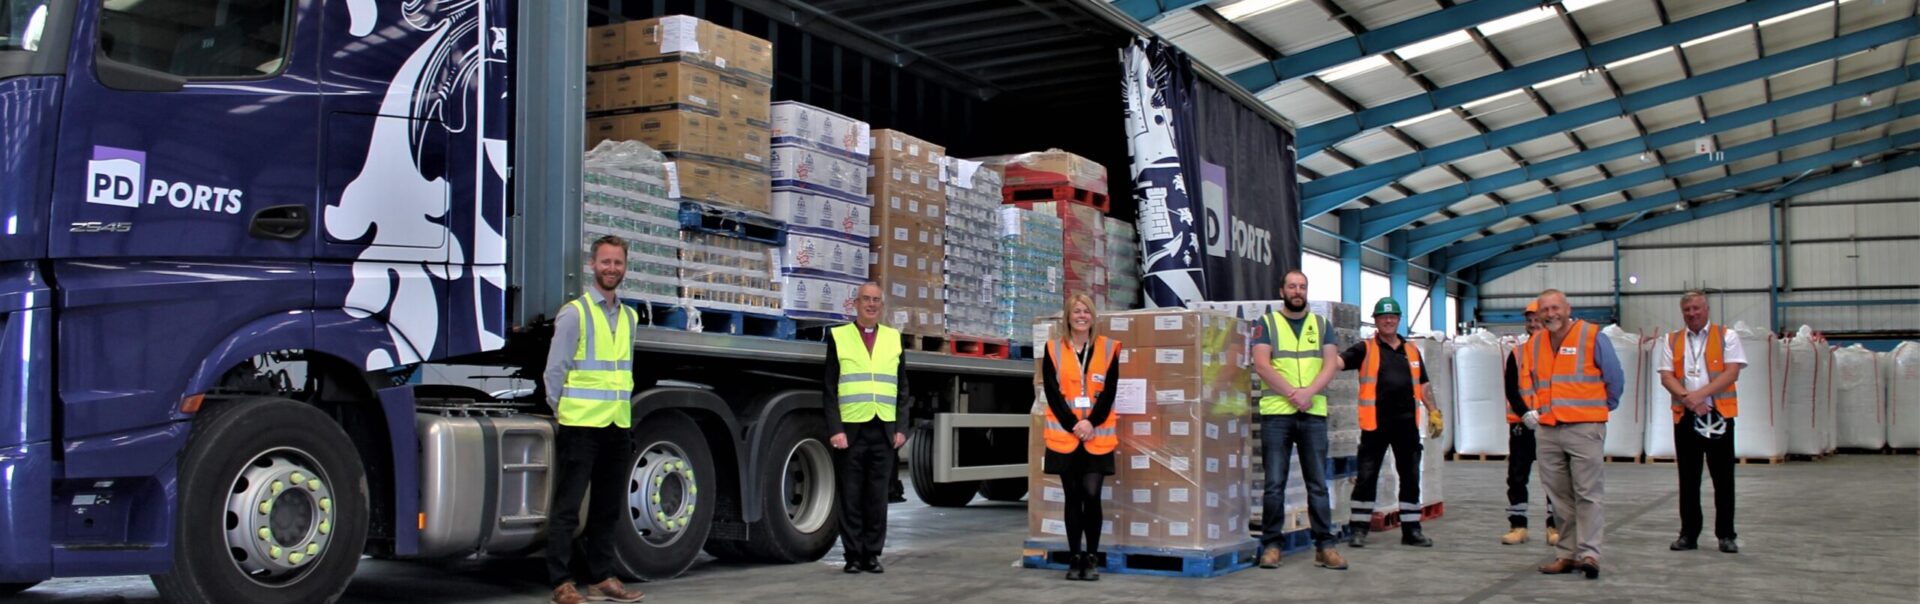 PD Ports volunteers support to combat holiday hunger across South Tees